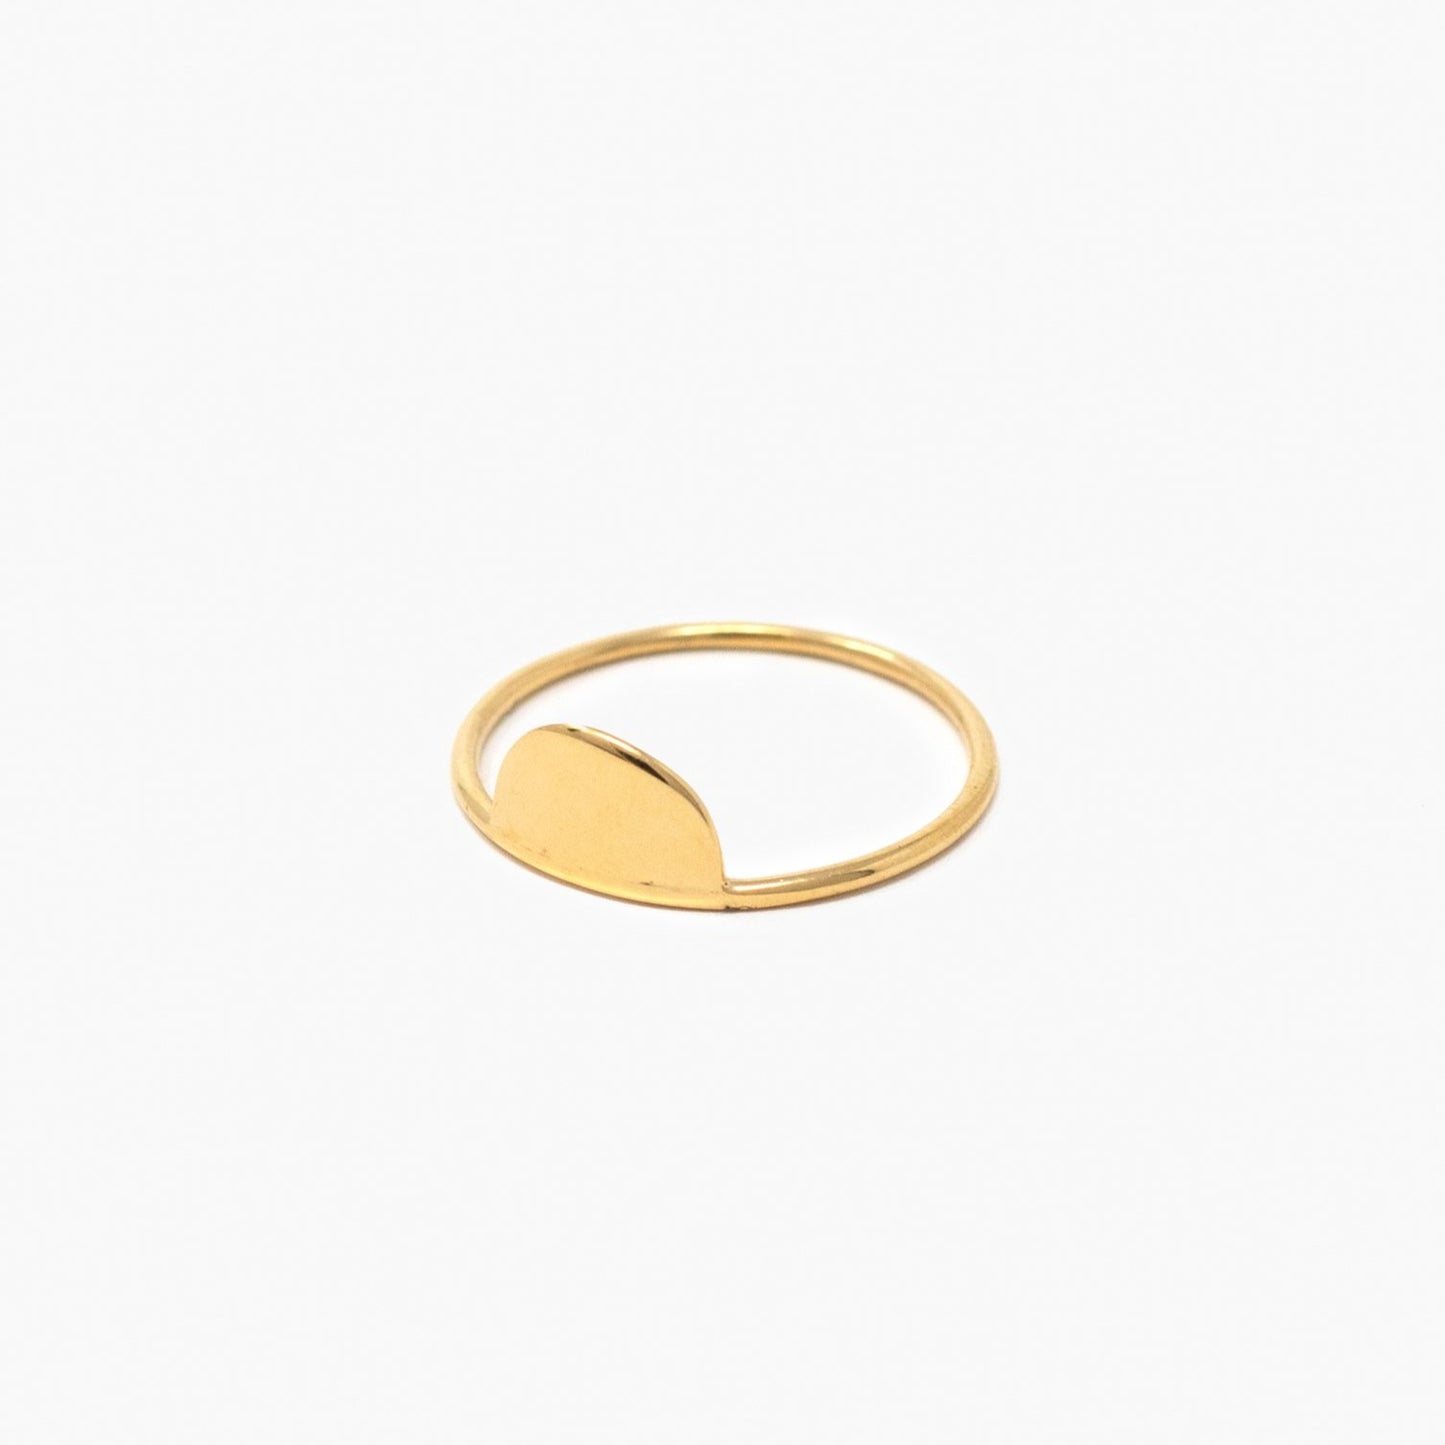 Able Jewelry: Luna Ring